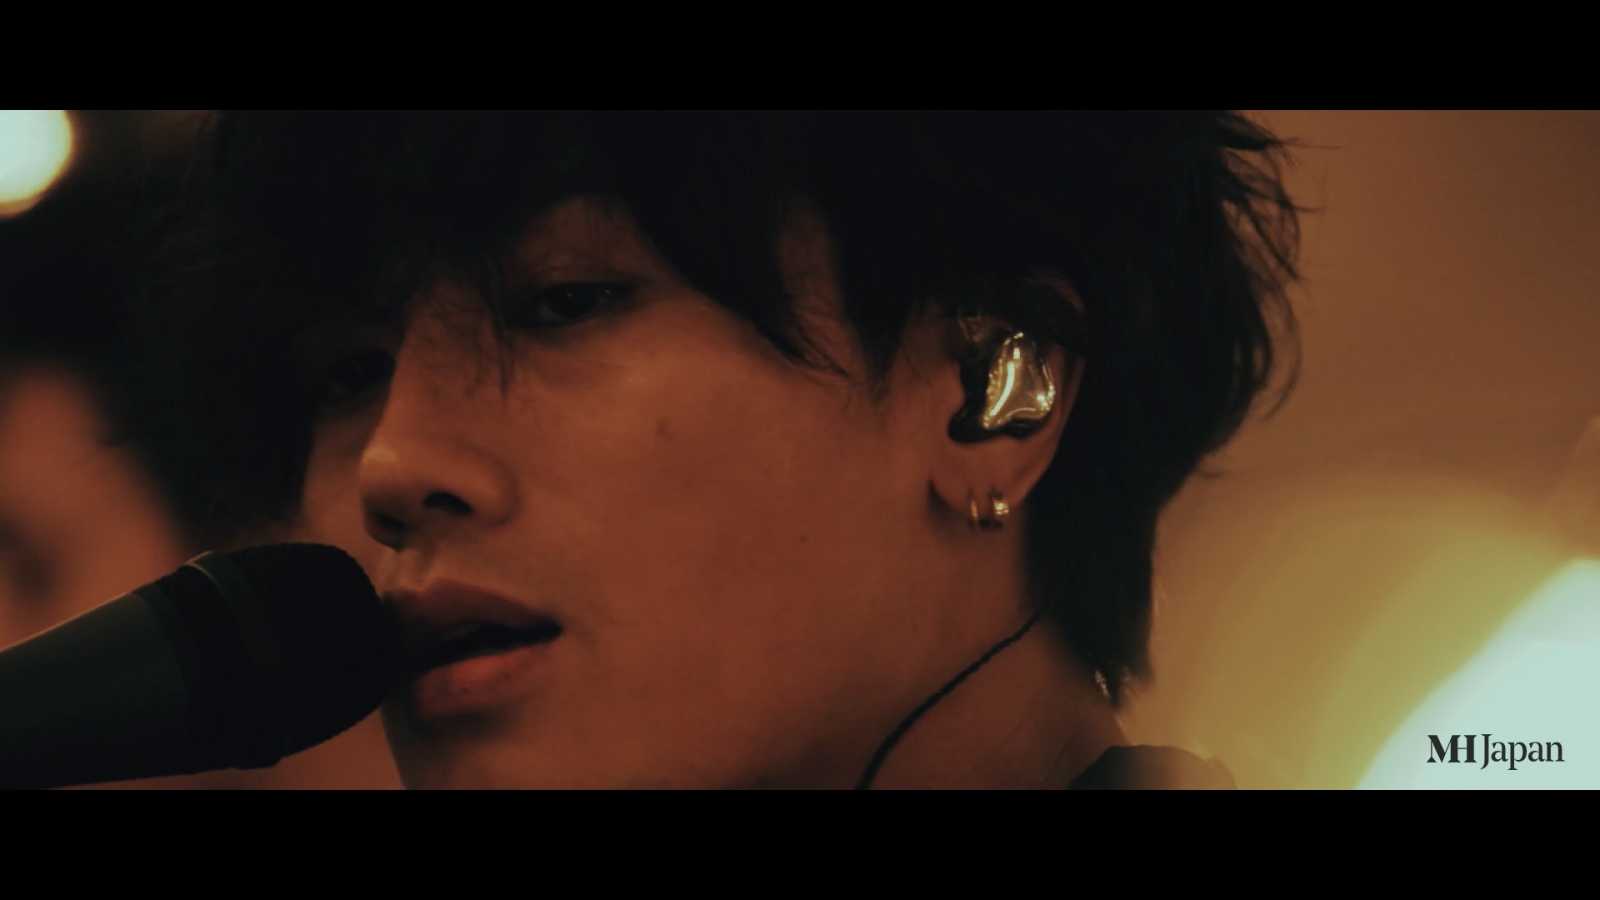 JIN AKANISHI ONLINE LIVE 2021 "Our Hour" © Jin Akanishi. All rights reserved.